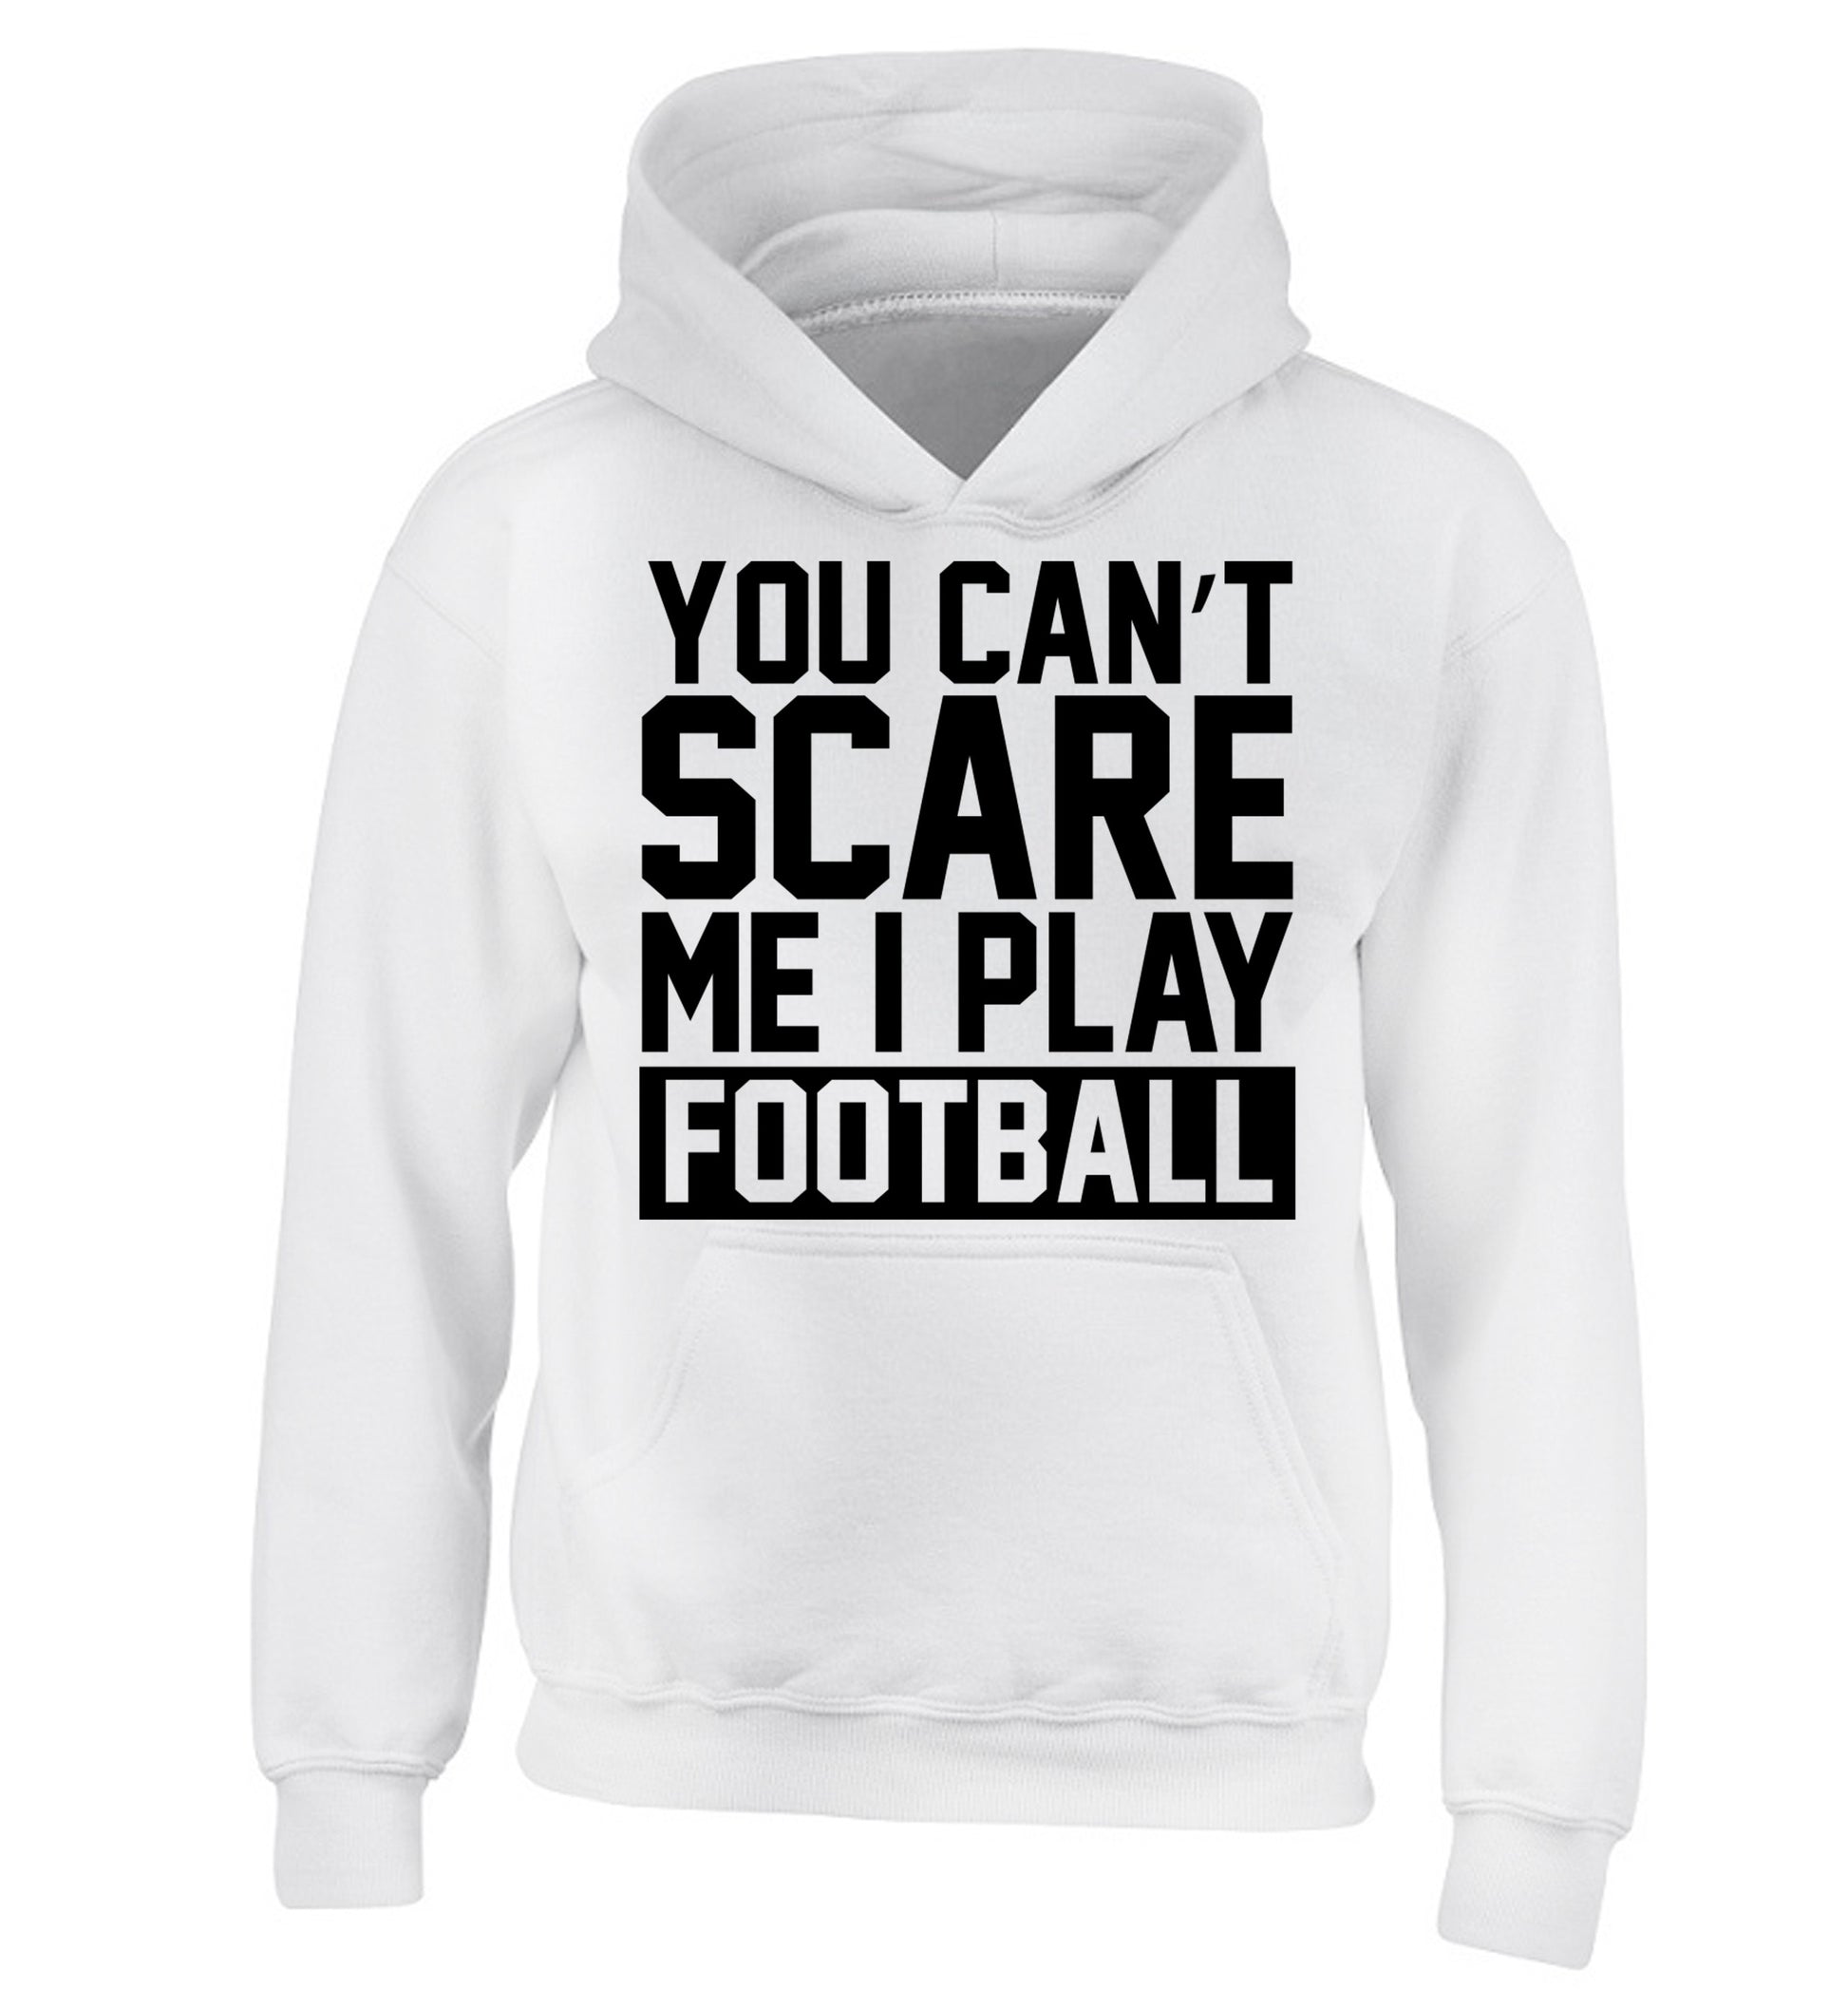 You can't scare me I play football children's white hoodie 12-14 Years